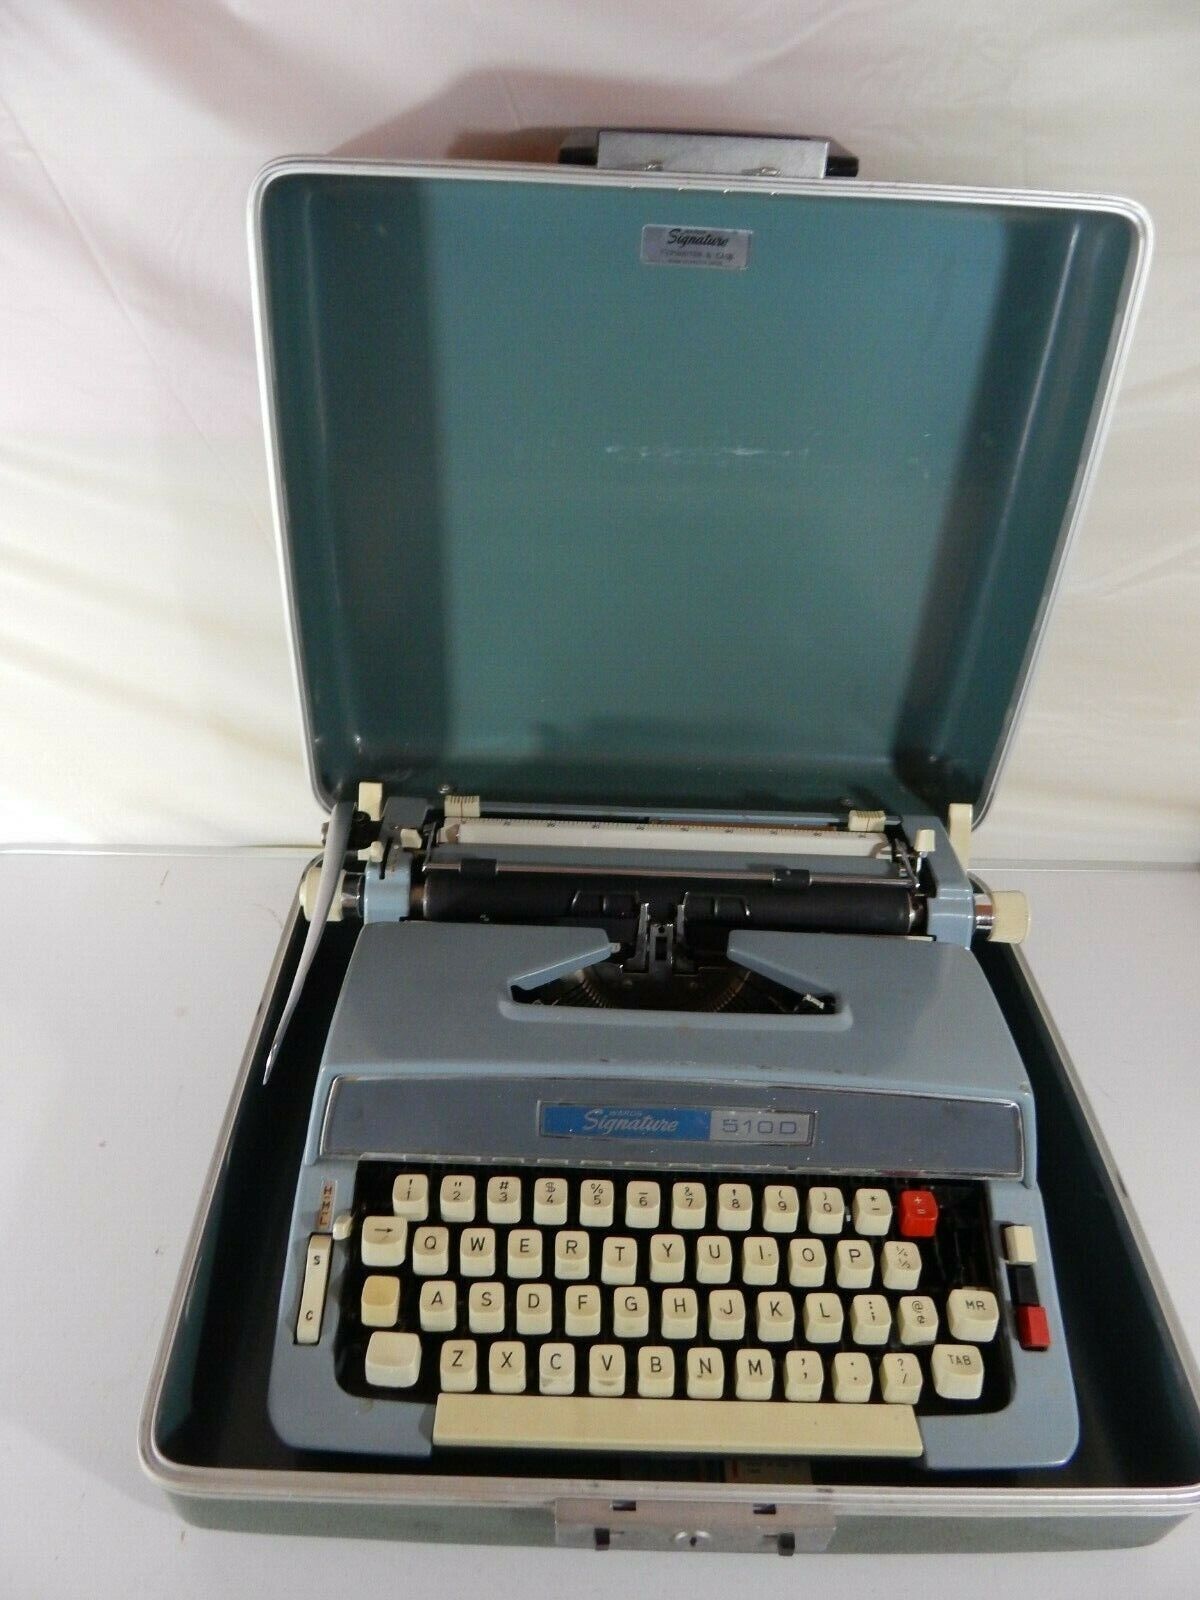 *VERY RARE* Vintage Wards Signature 510D Typewriter with Case *READ DESCRIPTION*